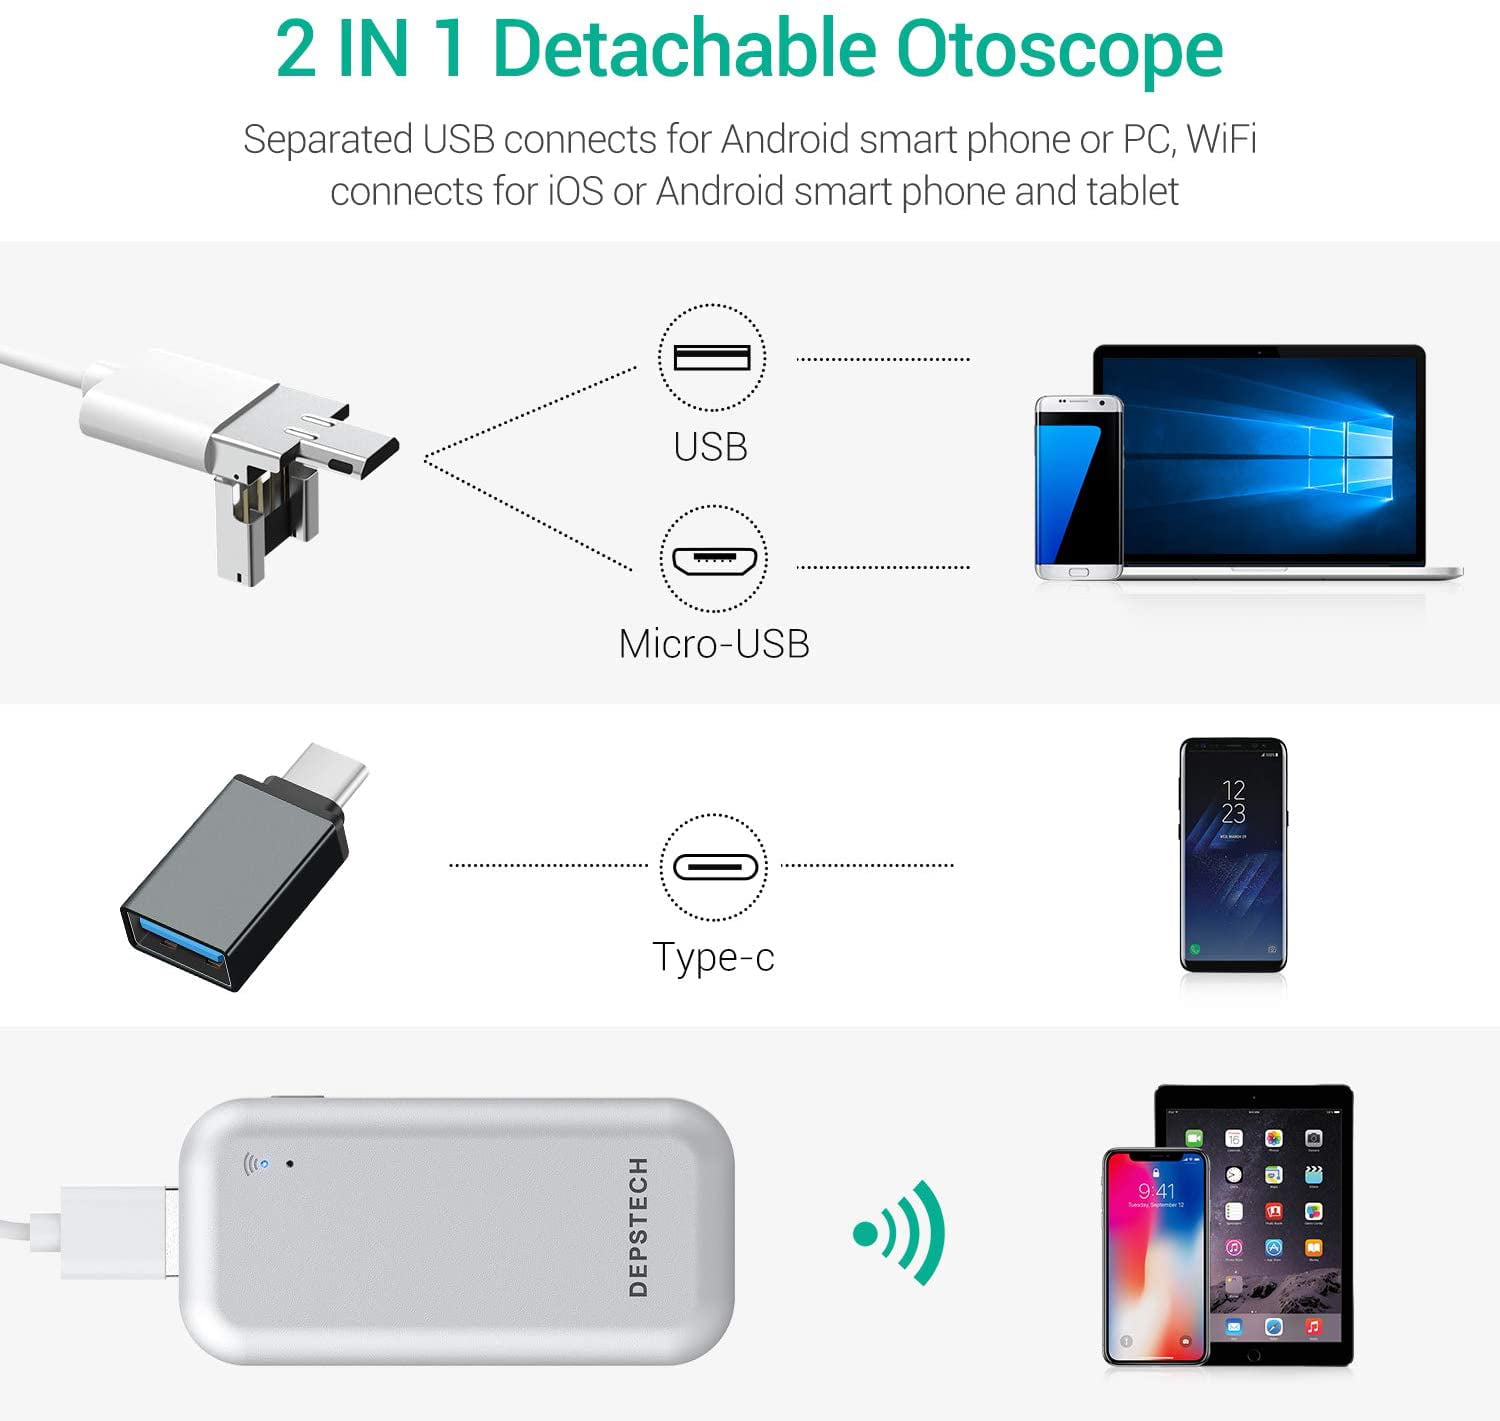 DEPSTECH 4.3mm Wireless Digital Ear Scope with 6 Adjustable LED Lights WiFi Otoscope Mac & Windows PC WiFi-USB Ear Inspection Camera Compatible with iOS Android 